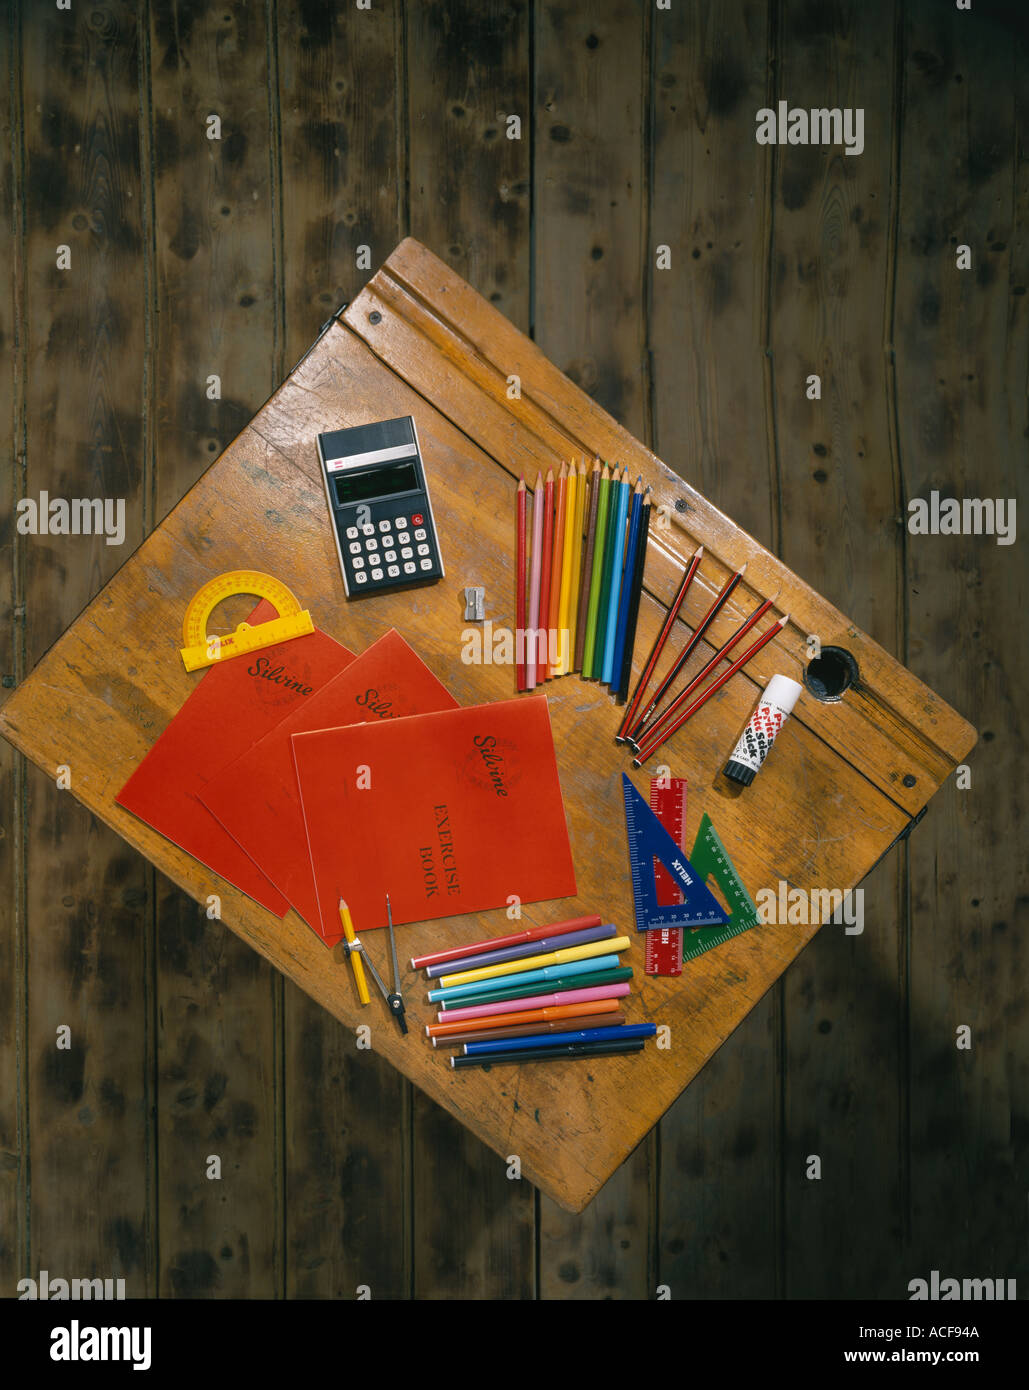 School desk with exercise book pencils and measuring instruments Stock Photo